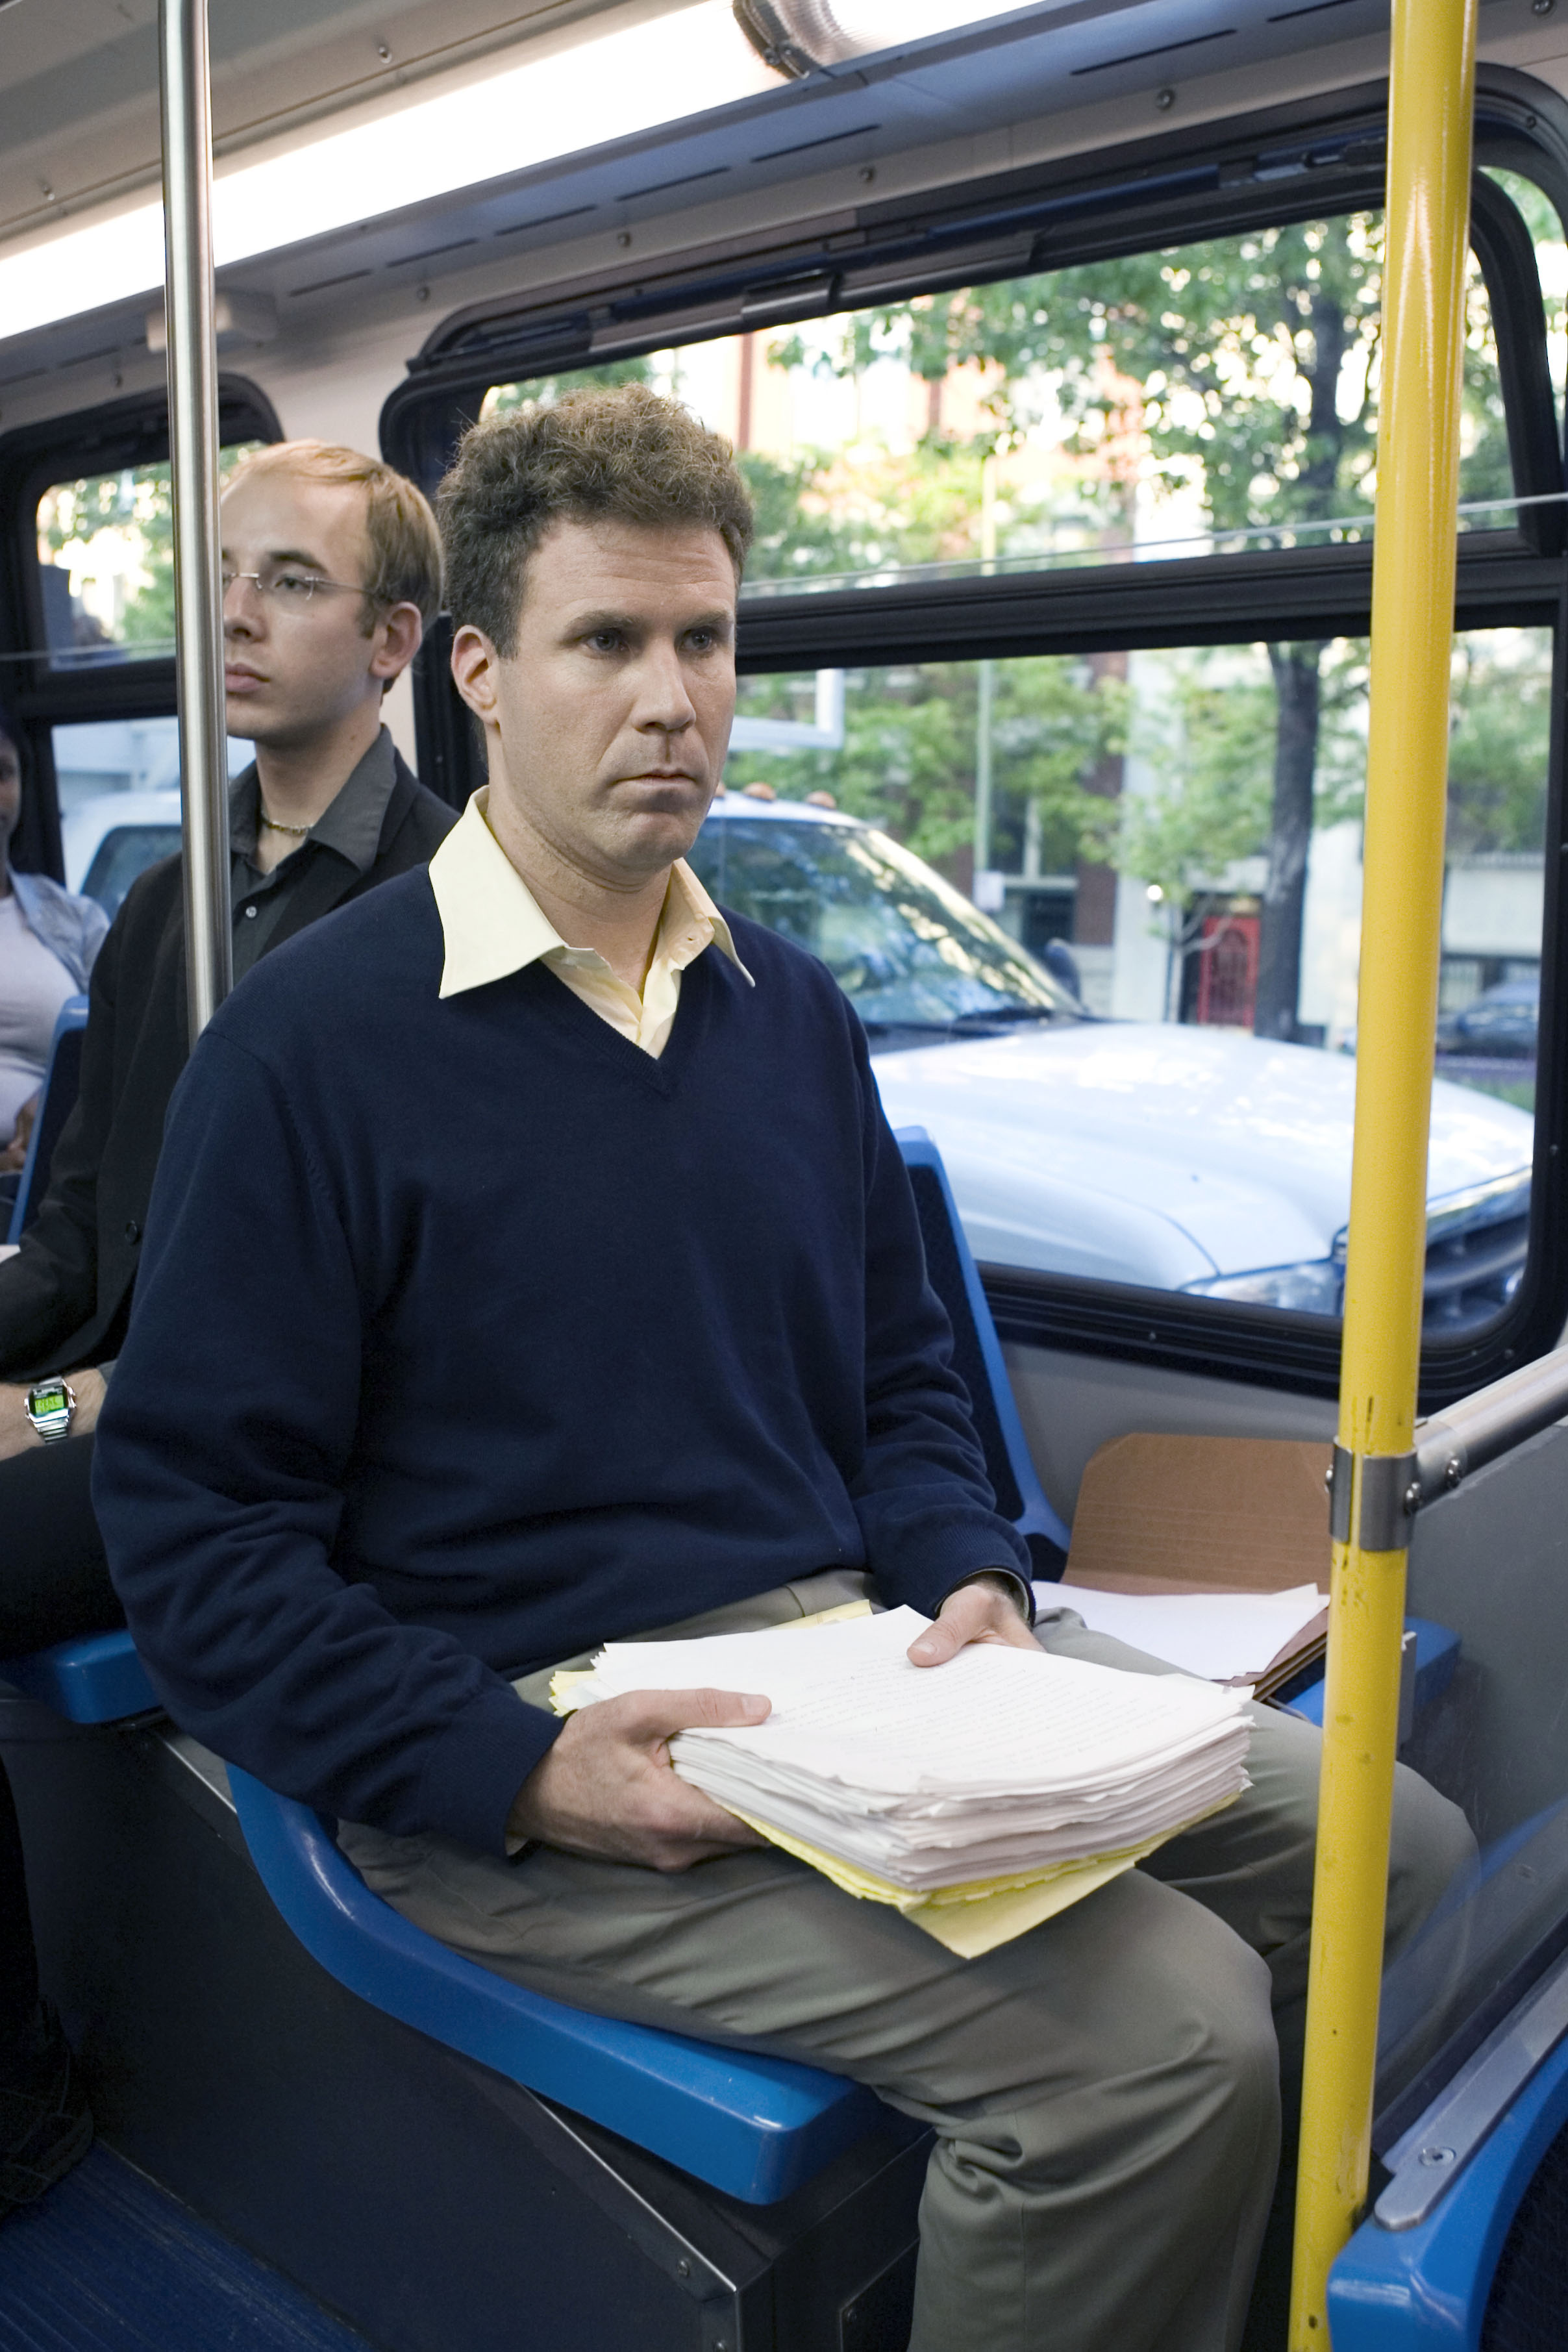 <p>"Stranger Than Fiction" was Will Ferrell's first attempt at drama and definitely his best. Will played Harold Crick, an IRS worker who begins hearing a disembodied voice narrating his life as it happens. The movie has been praised for its innovative storyline and strong performances from Will and co-stars Maggie Gyllenhaal and Dustin Hoffman.</p>